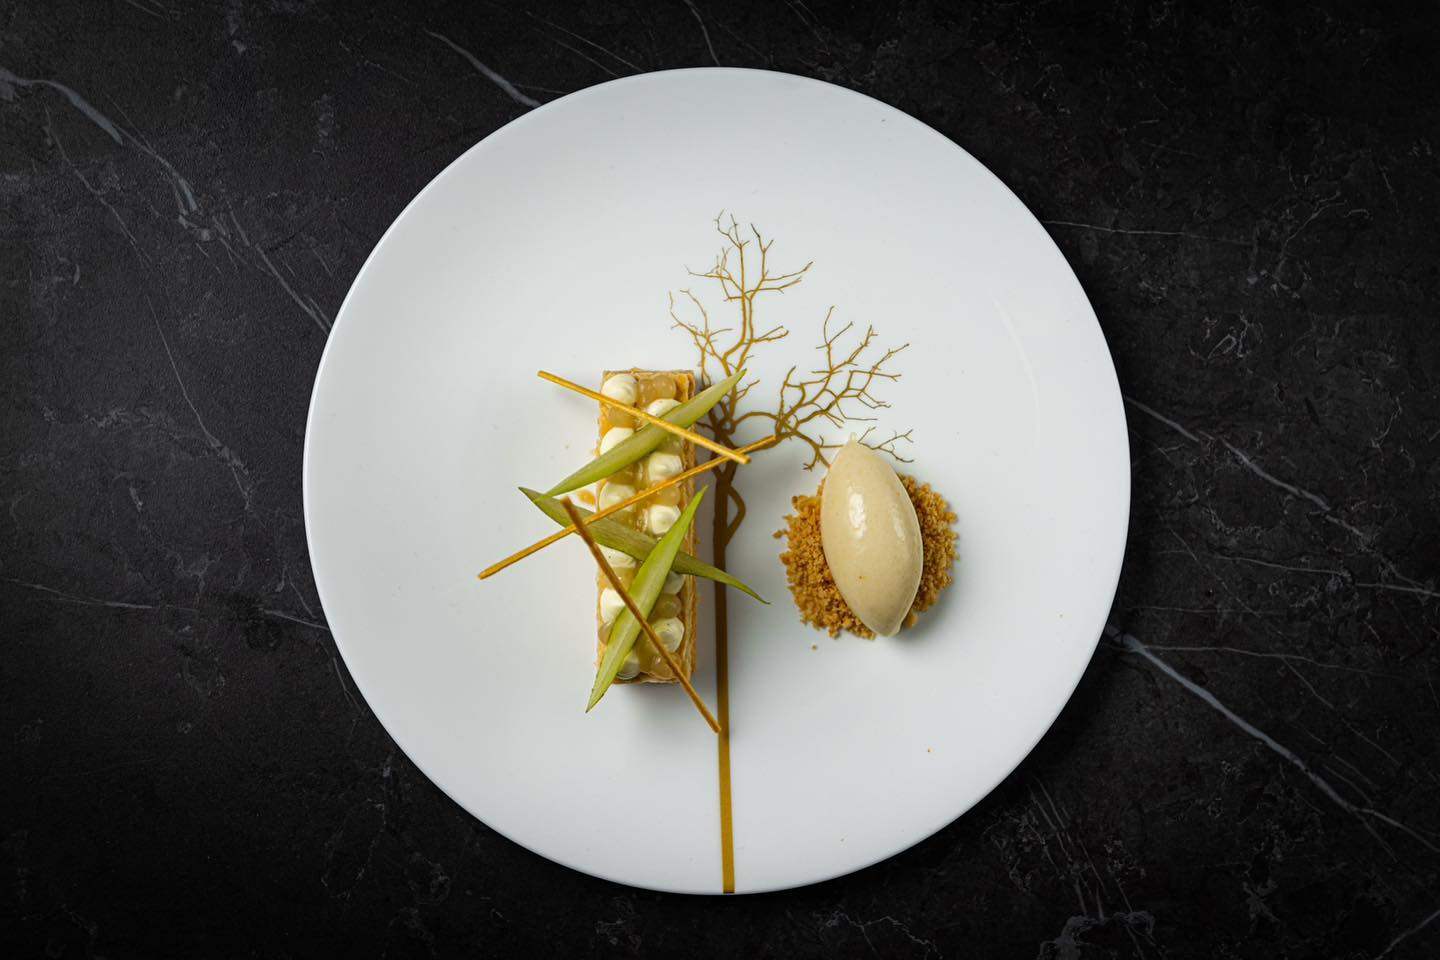 Mille-feuille with pear, gianduja and crème suisse at one-Michelin-star Bougainville, recently voted the world’s best restaurant on TripAdvisor. The award is a sign of just how far the Dutch gastronomy scene has come in recent years. Photo: Instagram/@Bougainville